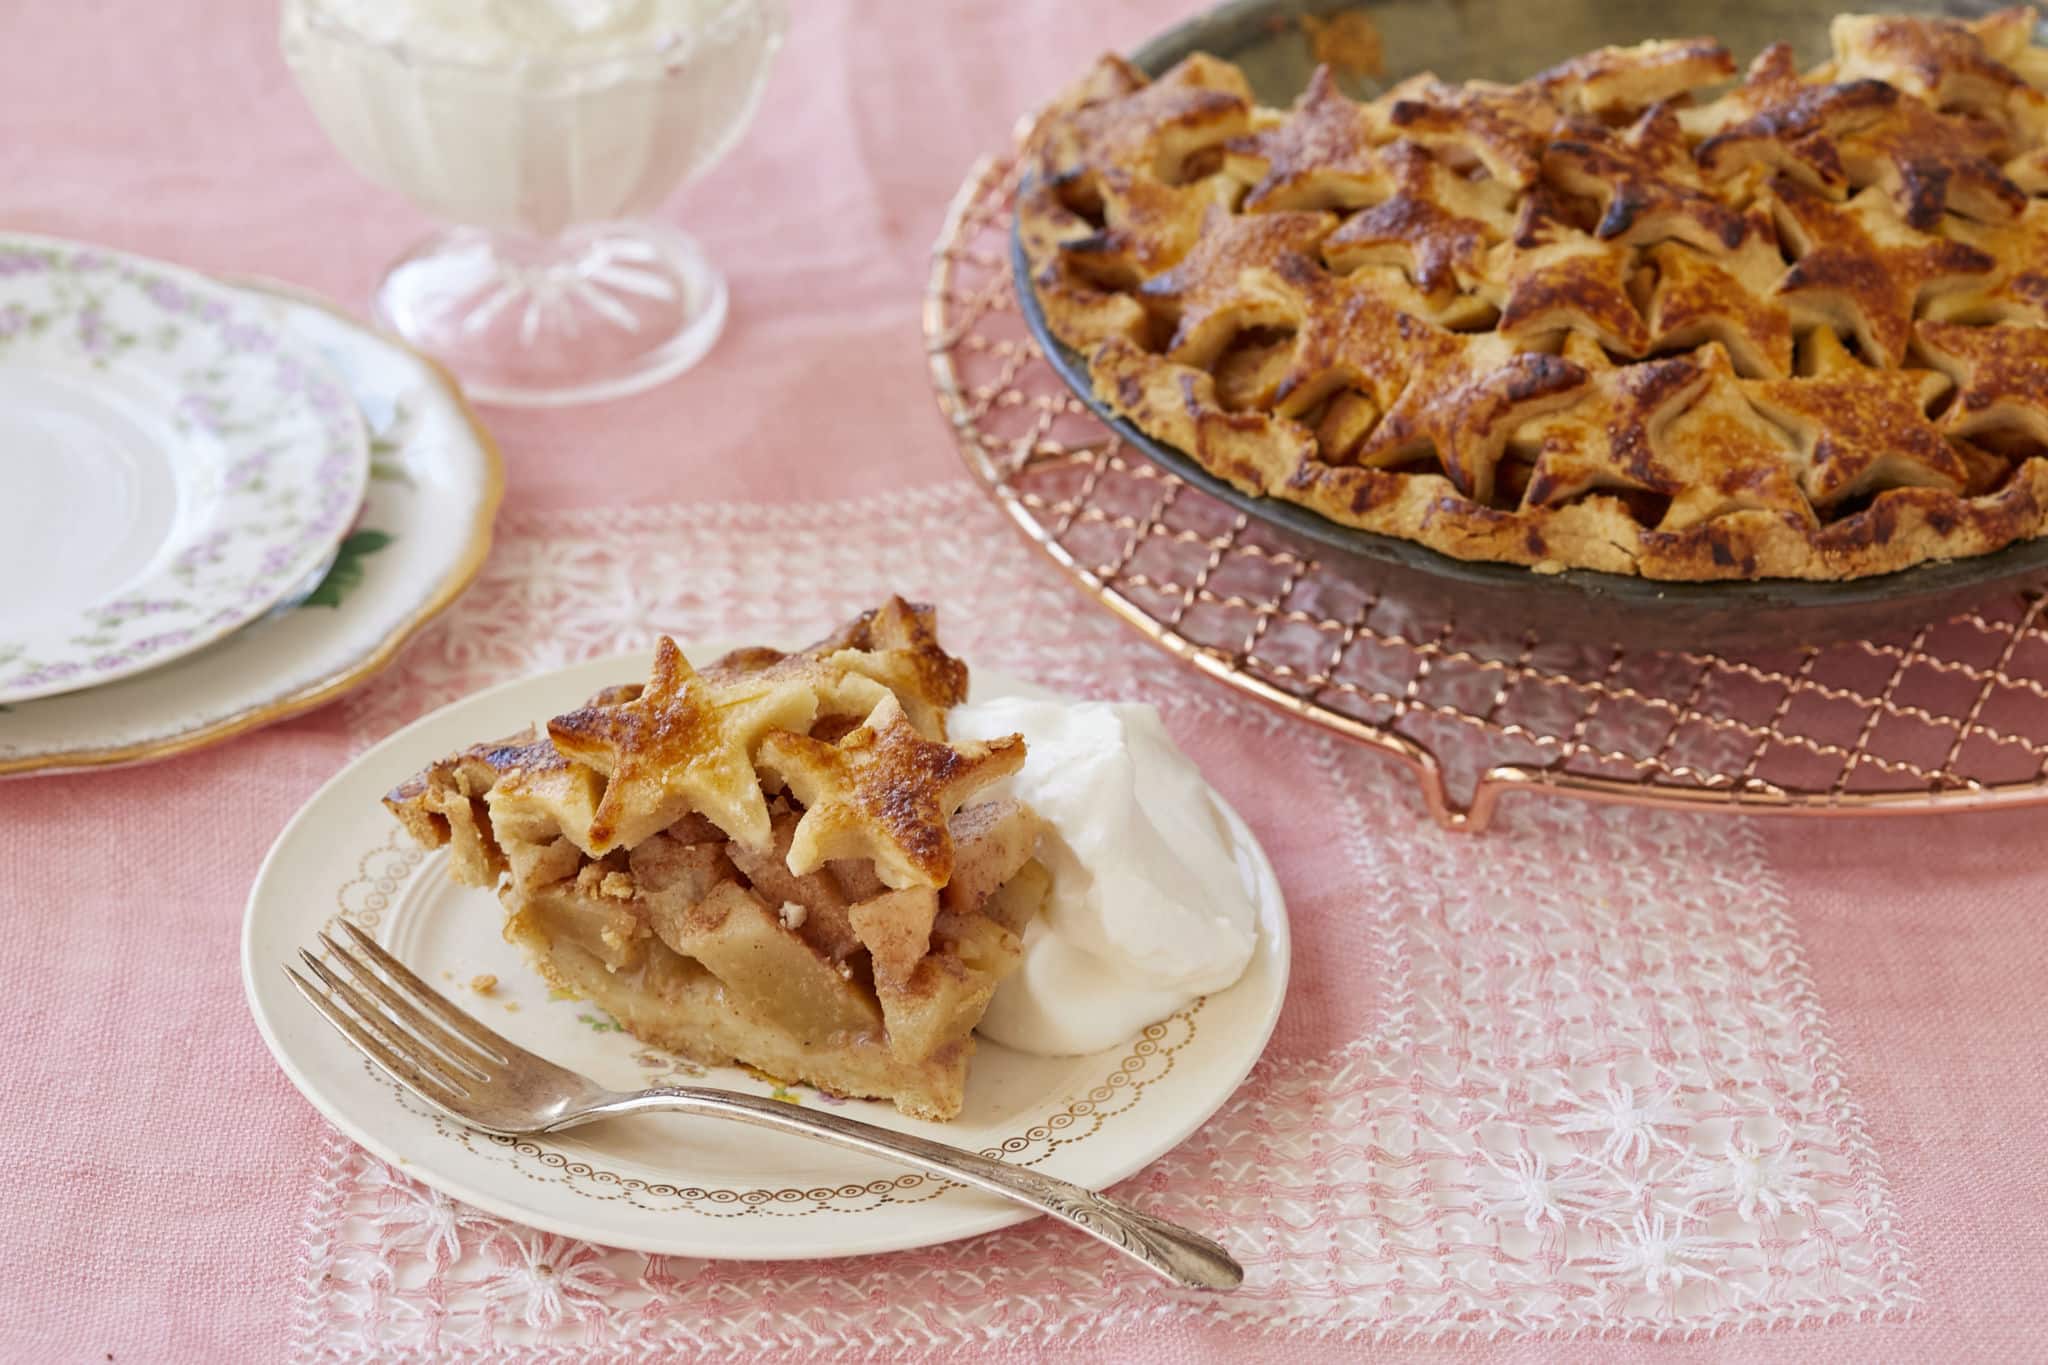 A slice of homemade Pear Buttertscotch Pie is served on a white plate on a pink table cloth. In the upper right corner is the rest of the pear butterscotch pie in the baking tin. To the upper left are two empty plates, stacked, and homemade whipped cream.